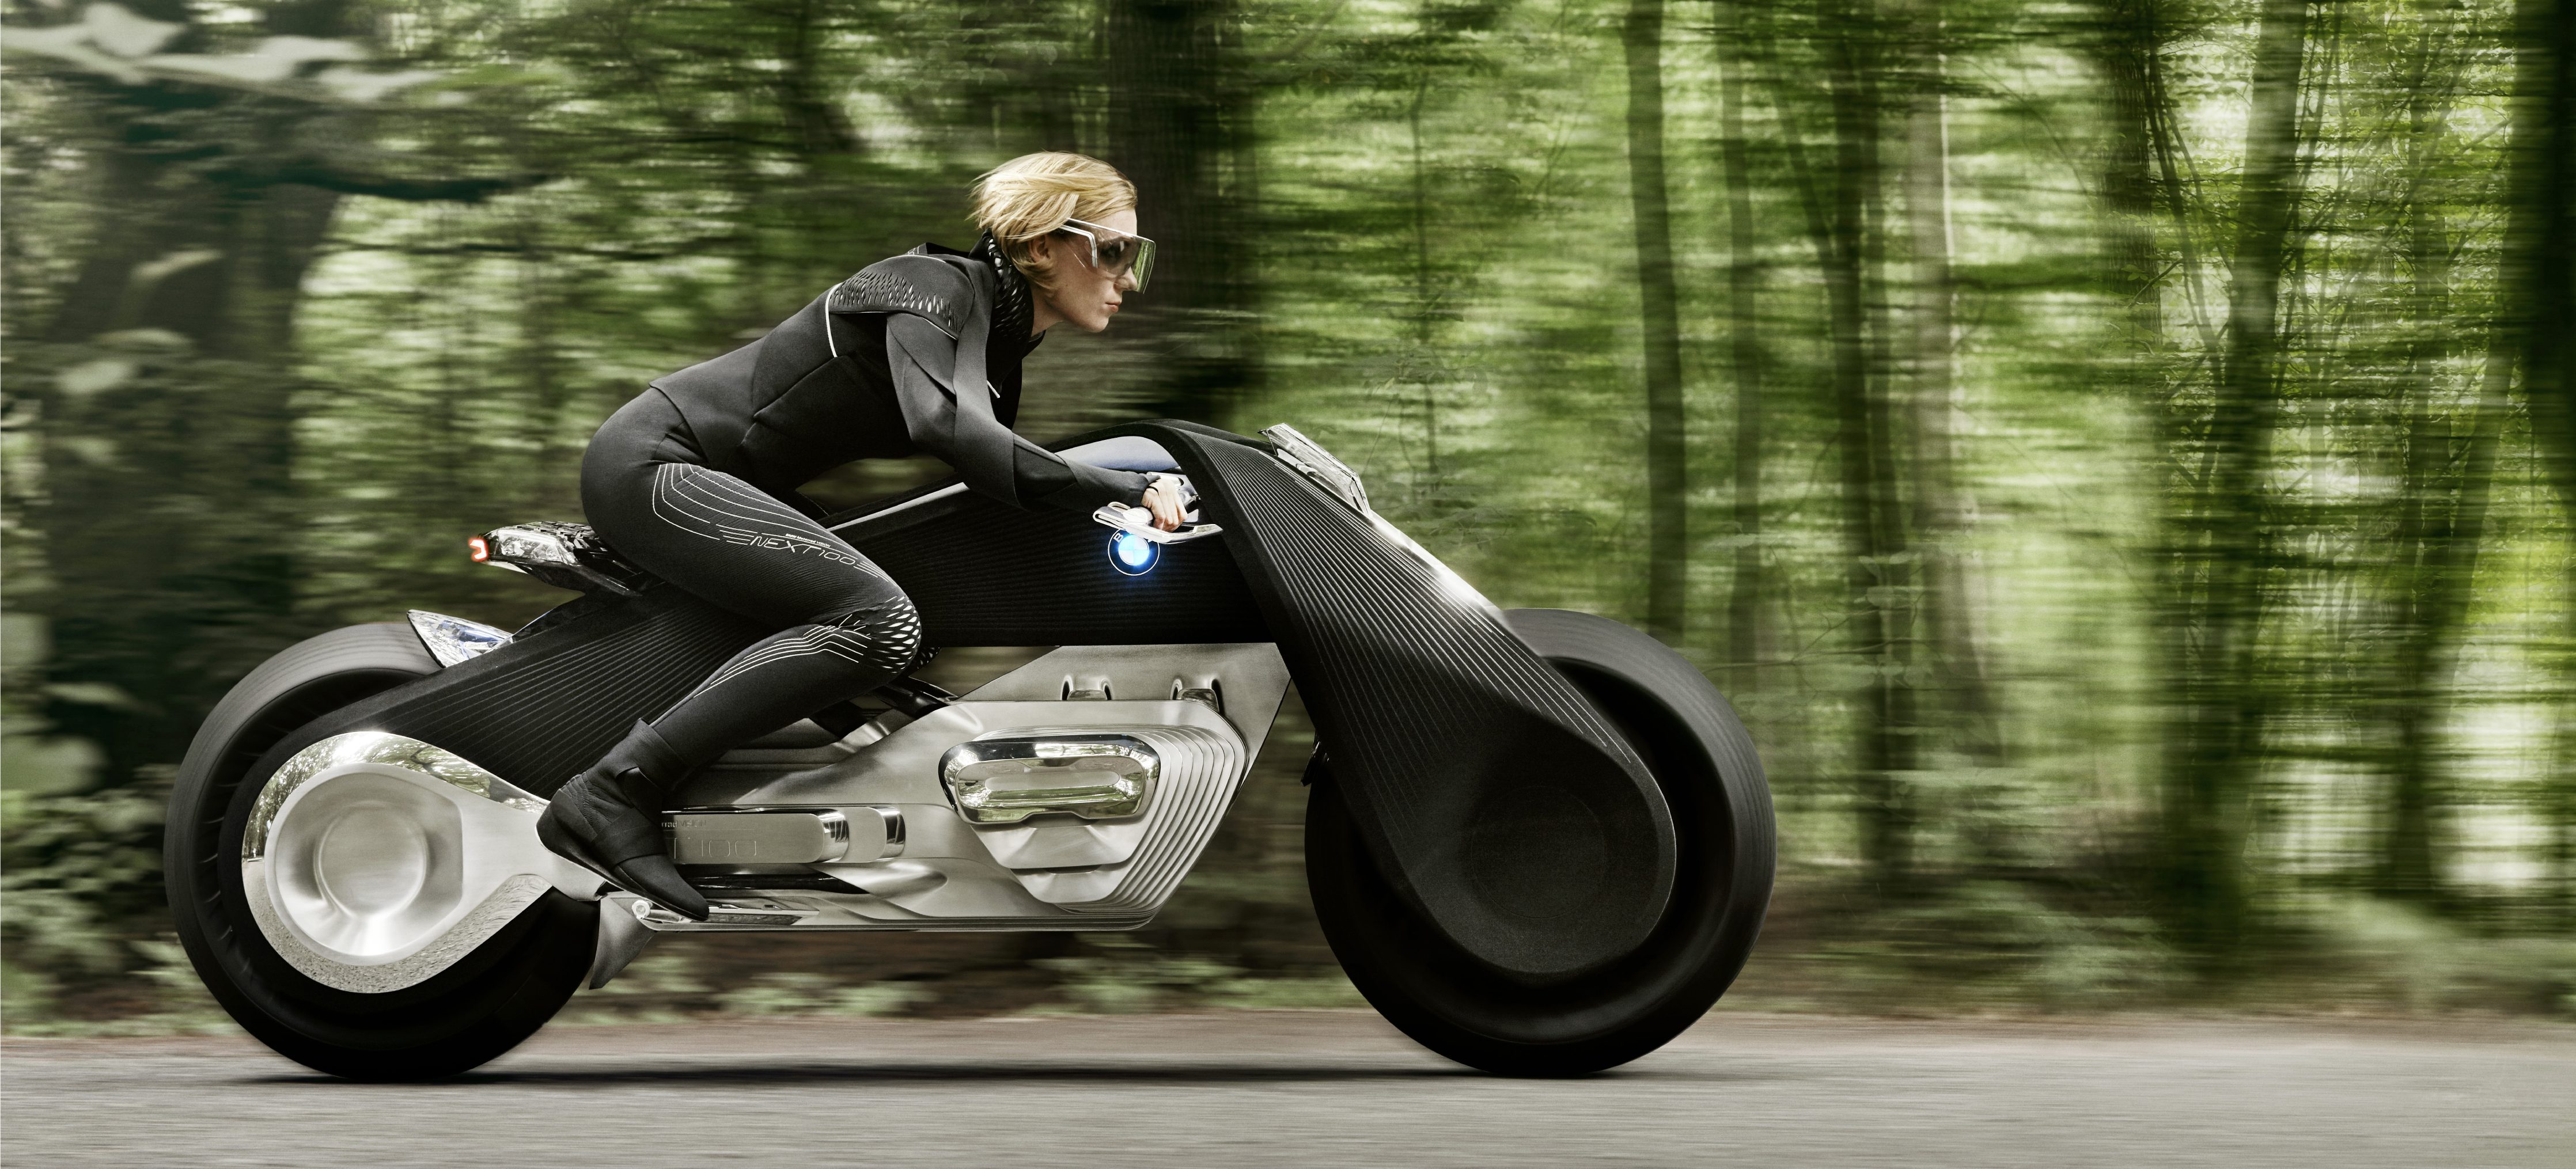 BMW unveils new selfbalancing electric motorcycle concept amid rumored